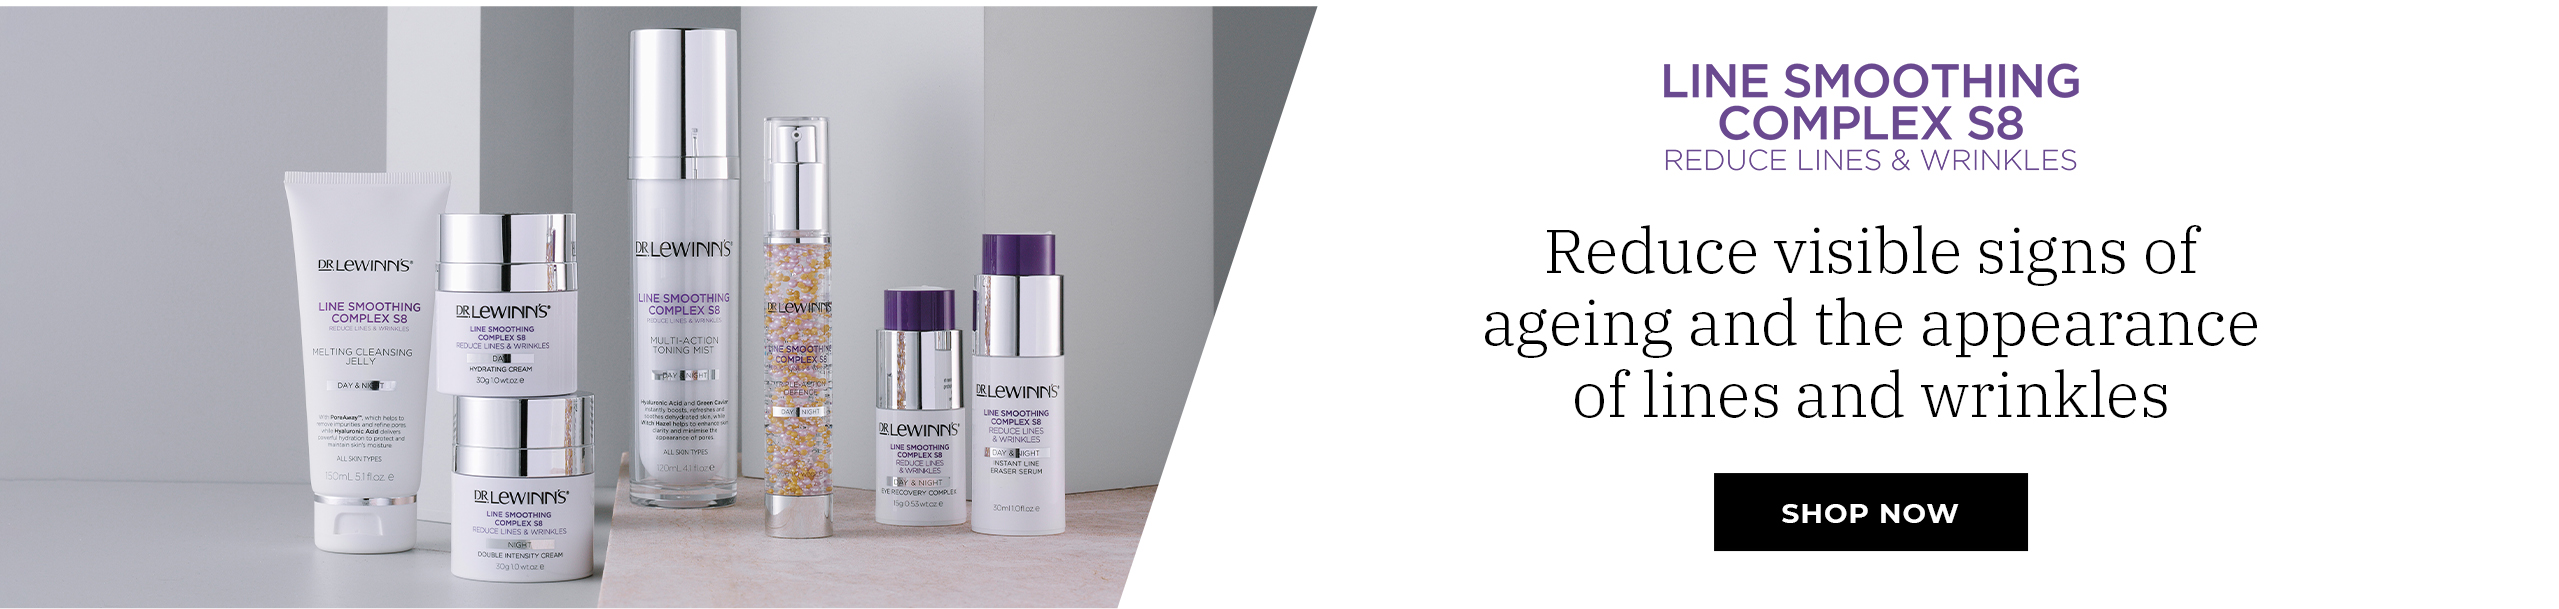 Discover Dr. LeWinn's Lime Smooth Complex S8